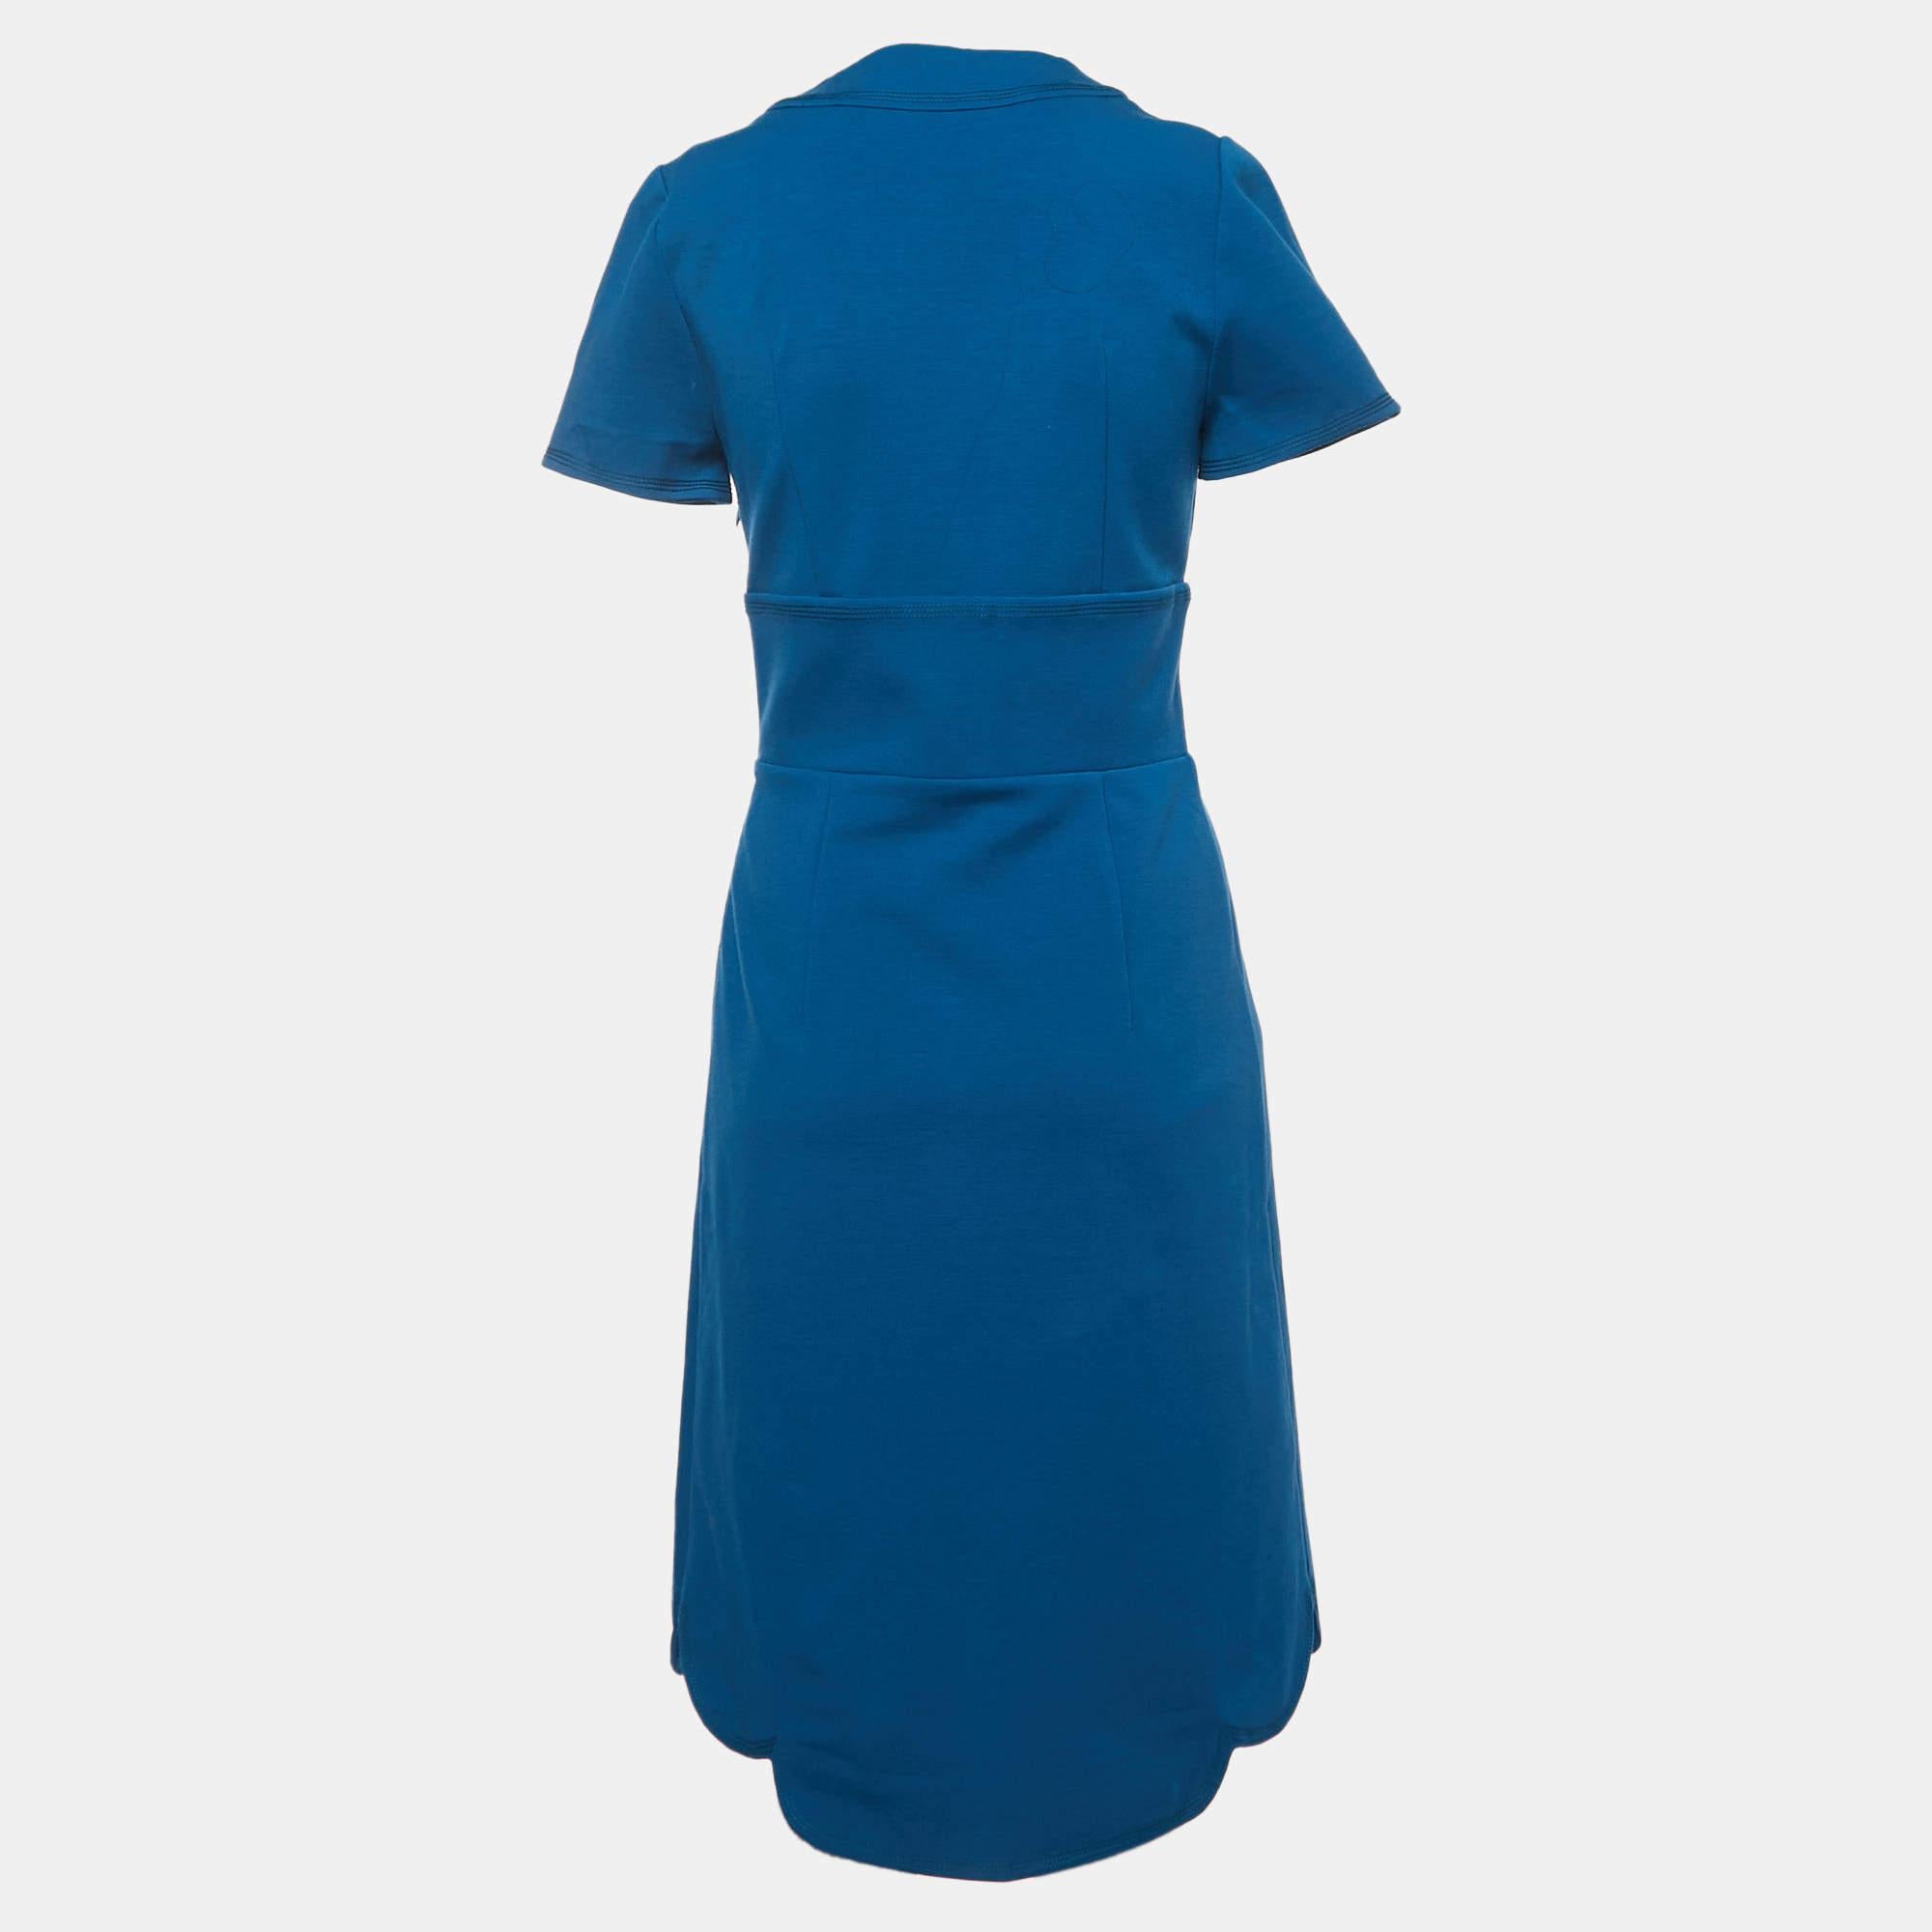 Exhibit a stylish look by wearing this beautiful designer dress. Tailored using fine fabric, this dress has a chic silhouette for a framing fit. Style the creation with chic accessories and pumps.

